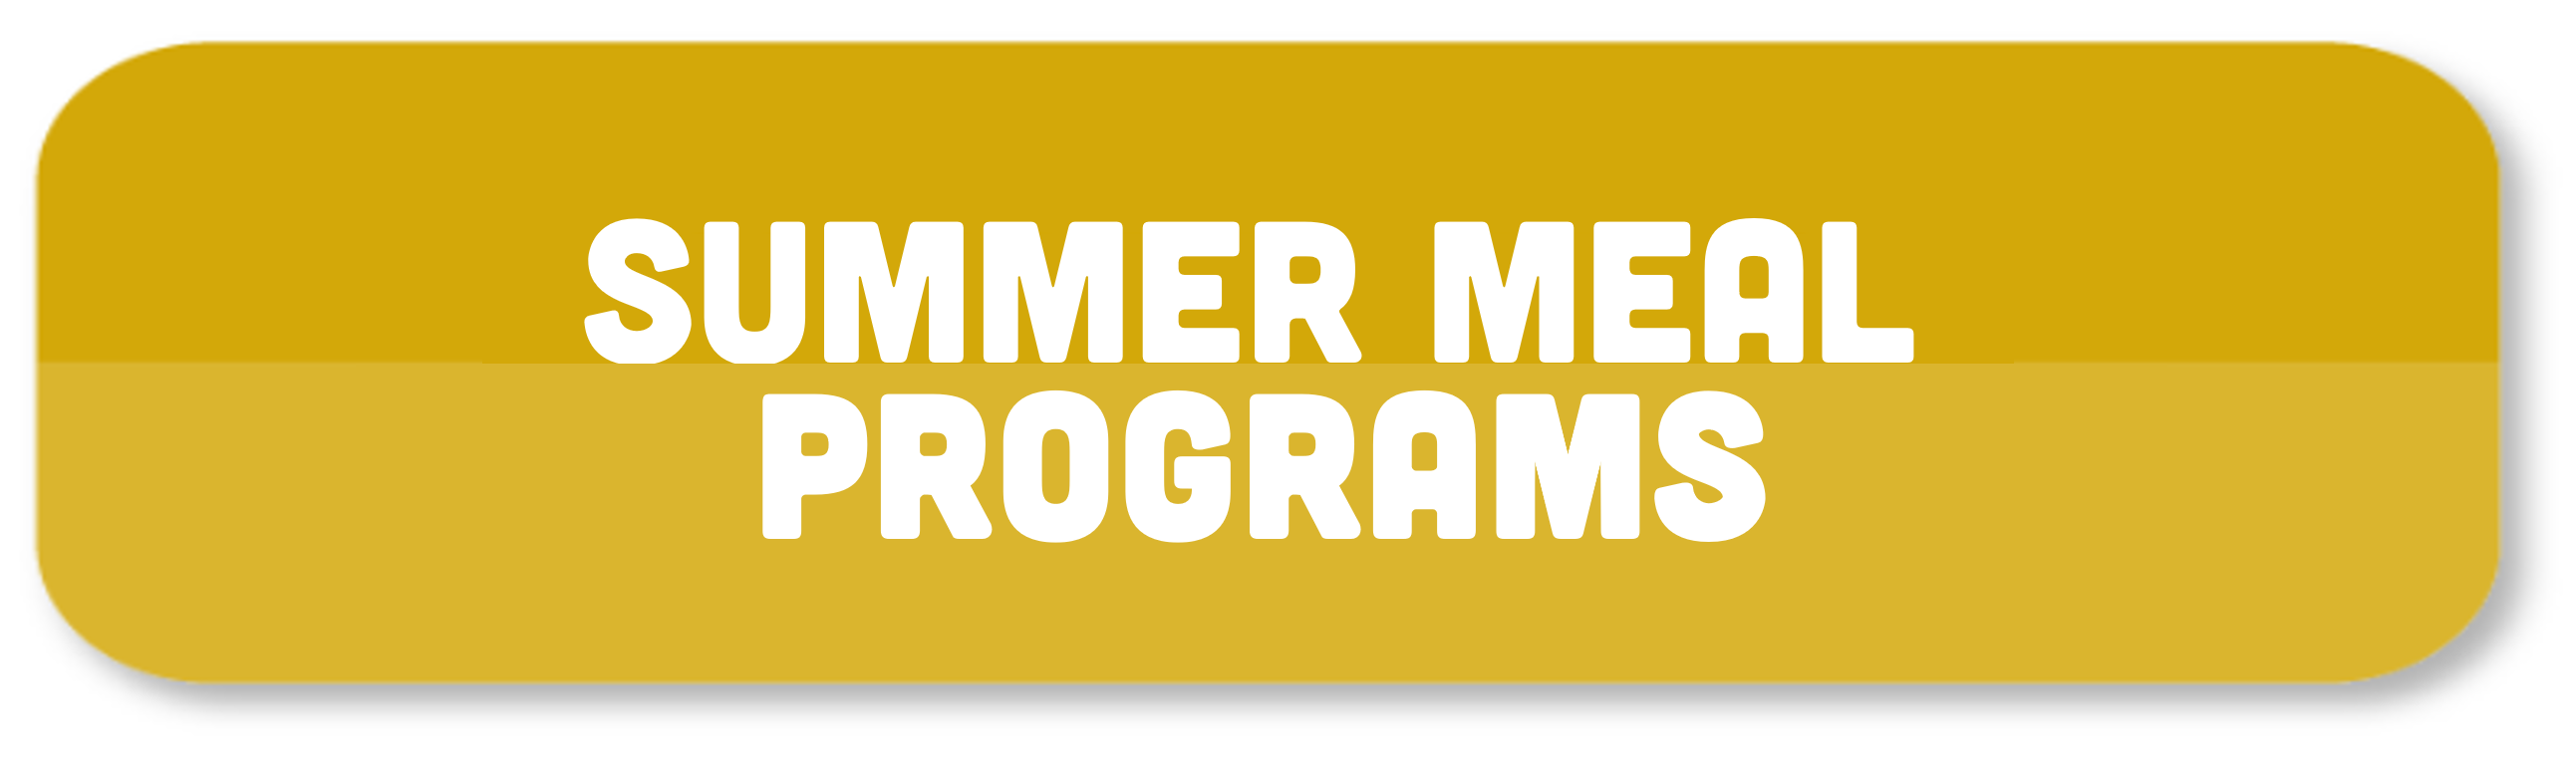 Summer Meal Programs.png